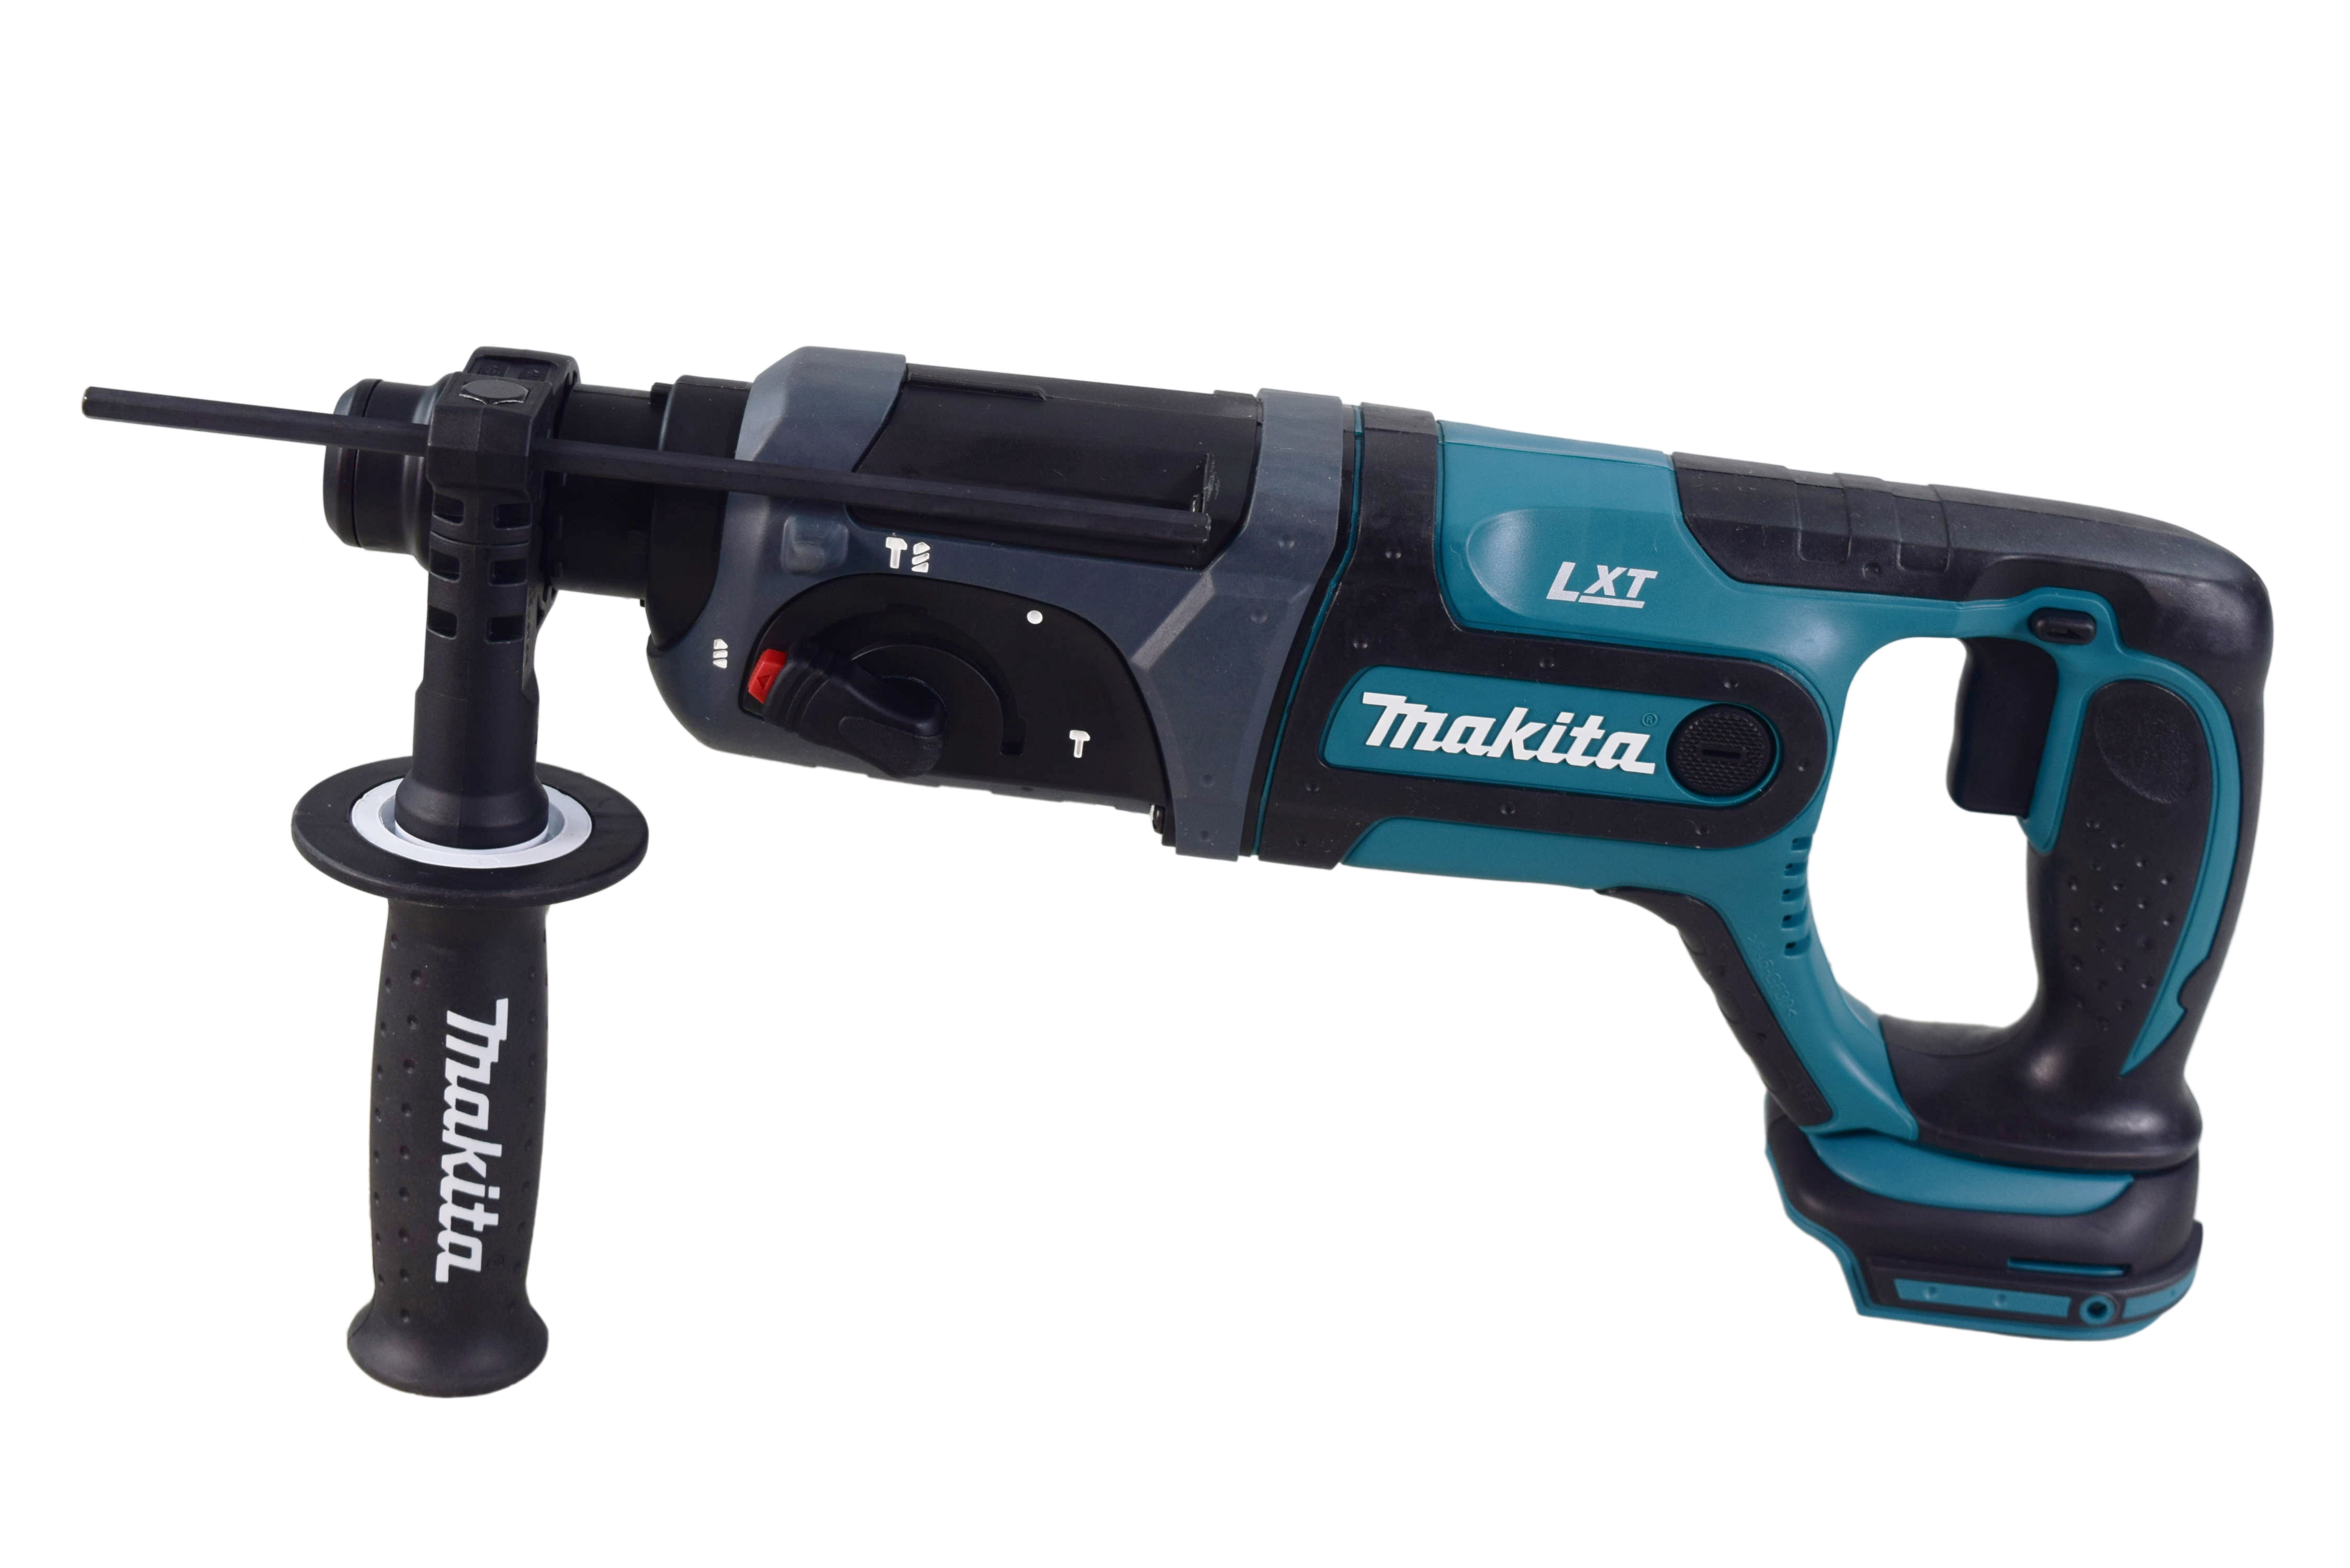 Makita Tools USA - In 2005, Makita created the 18V cordless tool category.  Today, Makita has the world's largest cordless tool line-up powered by 18V  lithium-ion batteries: 125+ tools, and more are